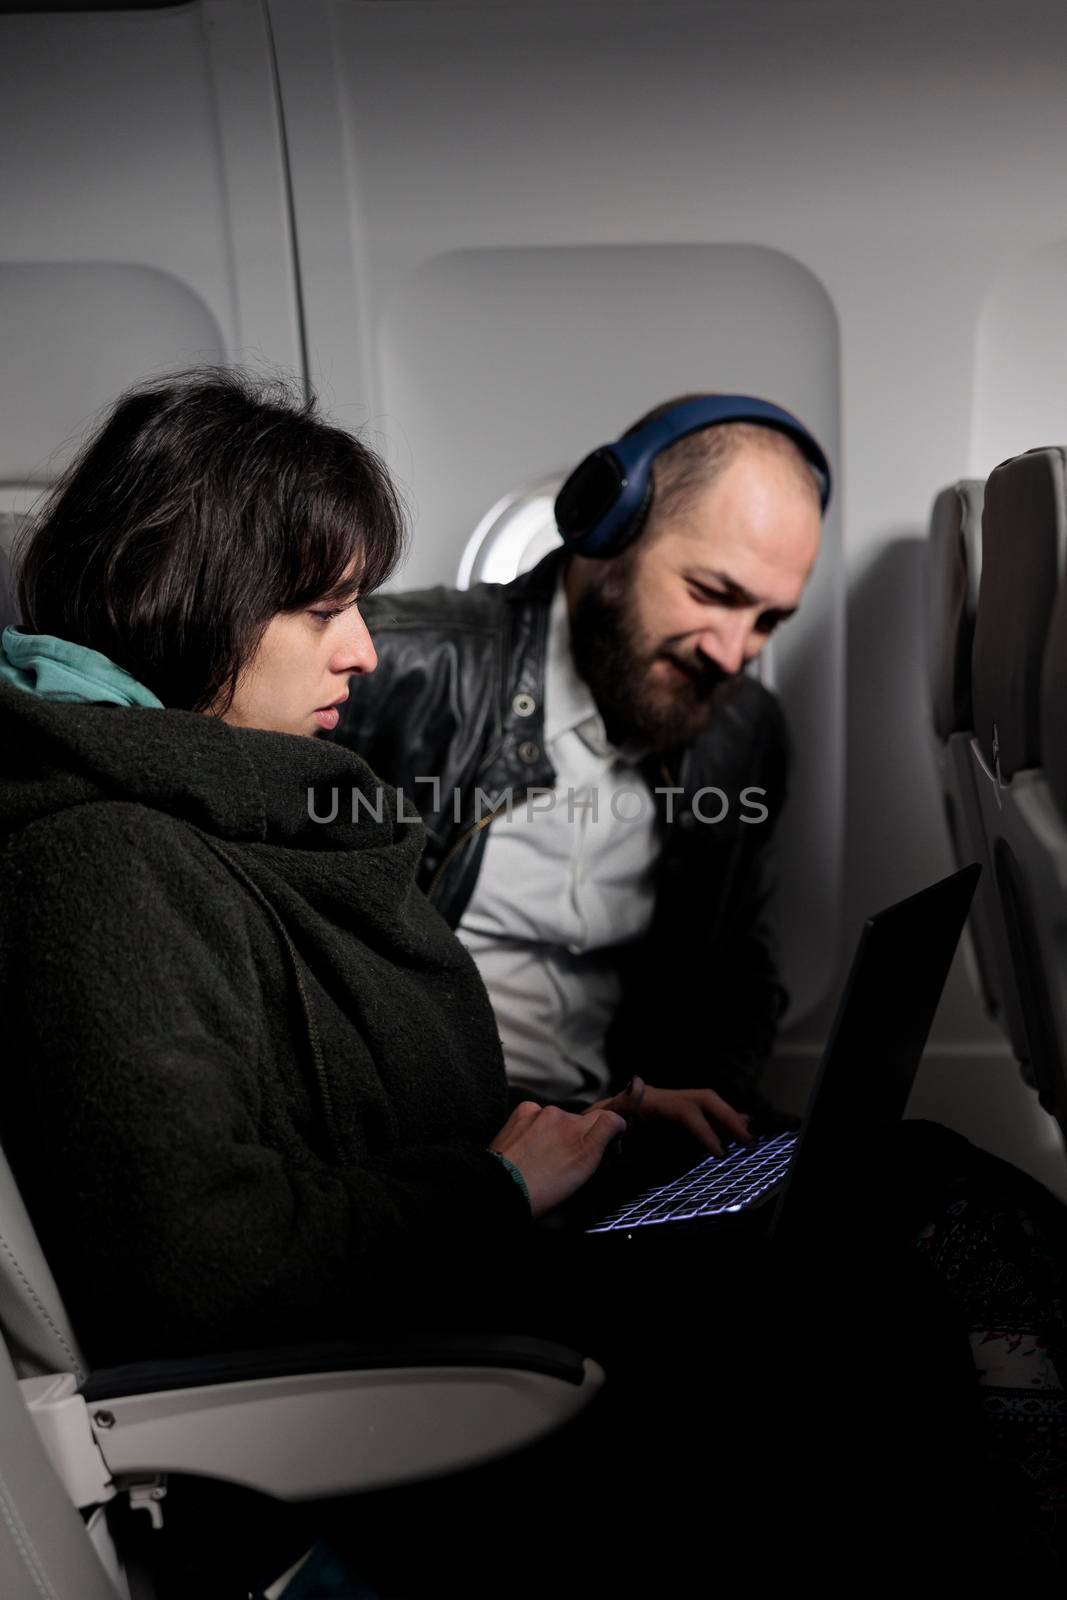 Couple travelling on holiday trip with aerial transportation, using laptop with online internet on commercial flight. Man and woman browsing computer on holiday destination, flying with plane.